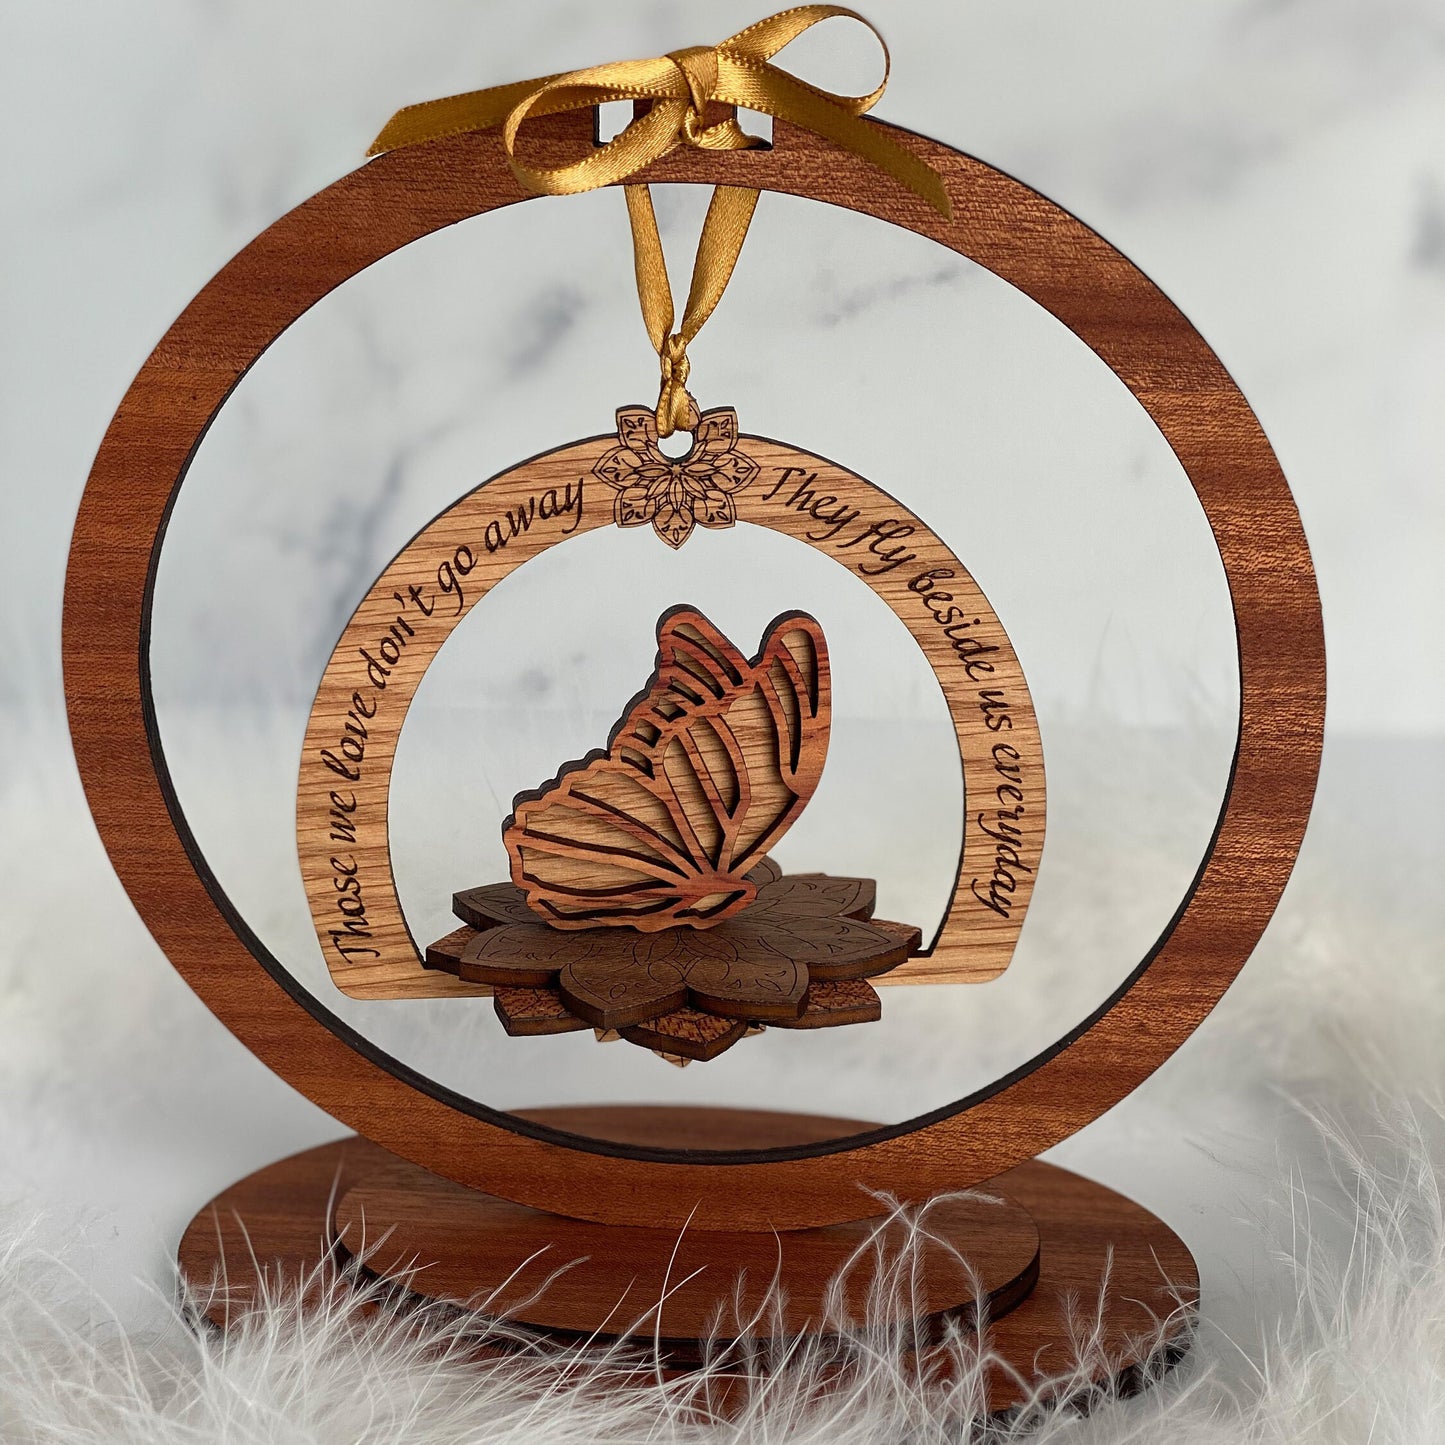 Personalized memorial remembrance display ornament INCLUDES stand, sympathy gift, butterfly, loss of loved one, designed for year round display.